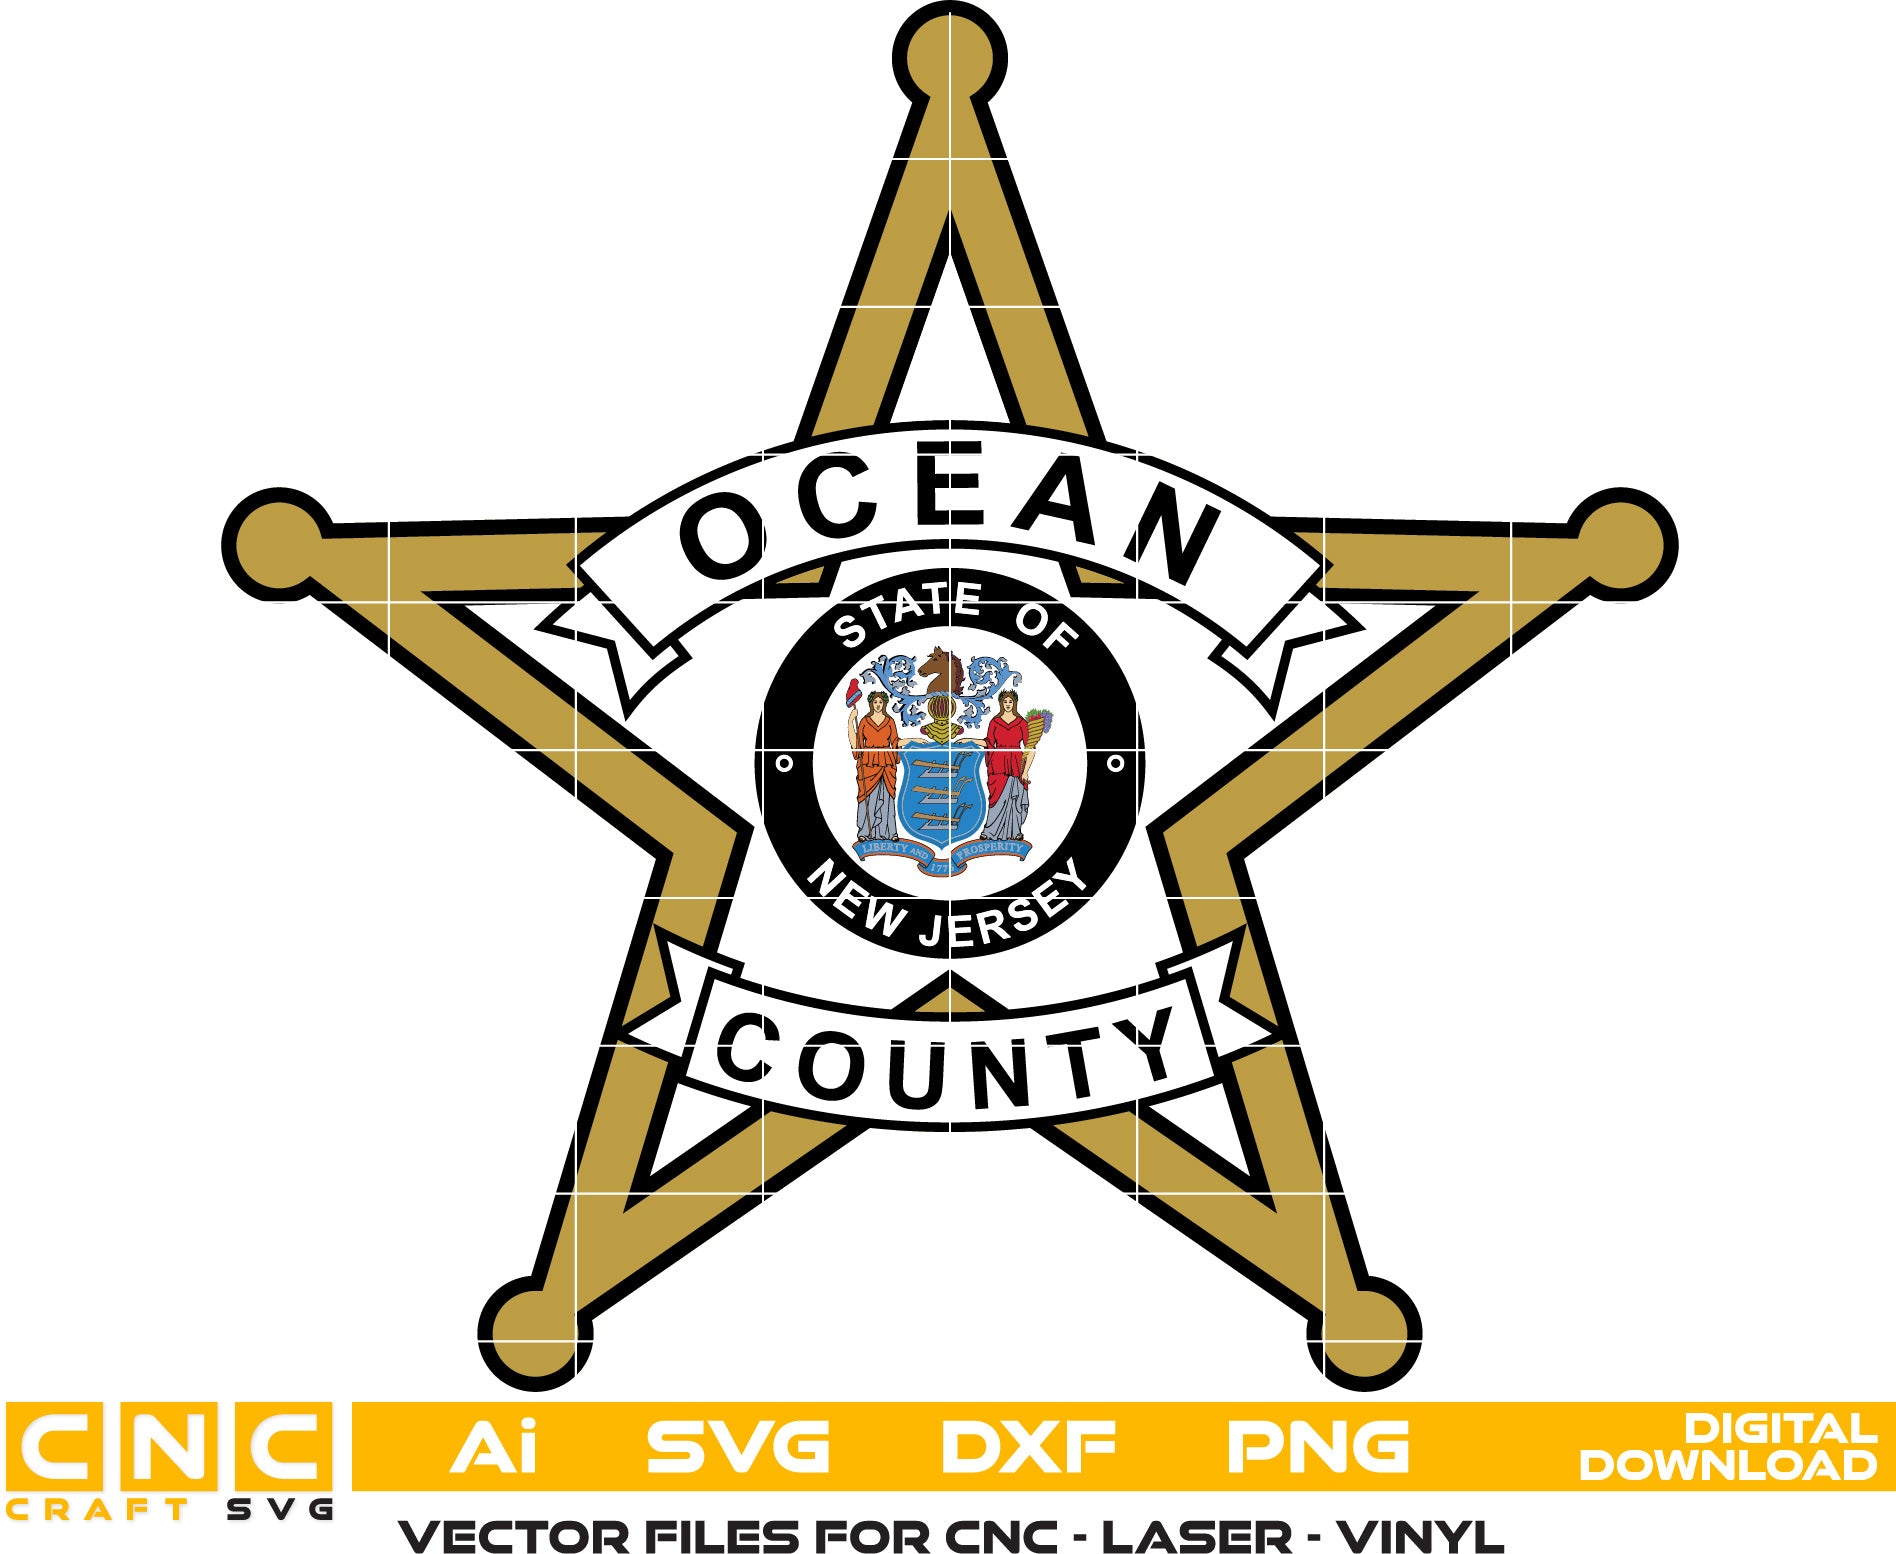 Ocean County Sheriff Badge, New Jersey Sheriff Badge Colour file for Laser engraving, woodworking, acrylic painting, glass etching, and all printing machines.